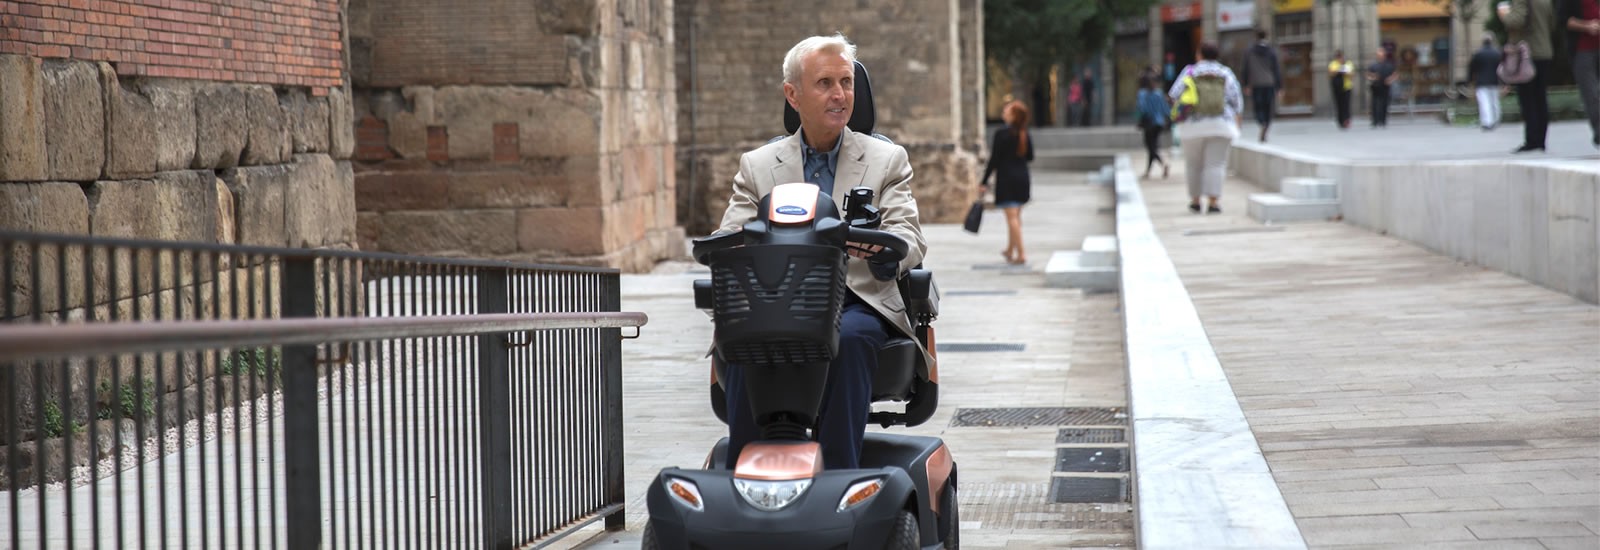 Mobility Scooter Hire in Funchal Madeira